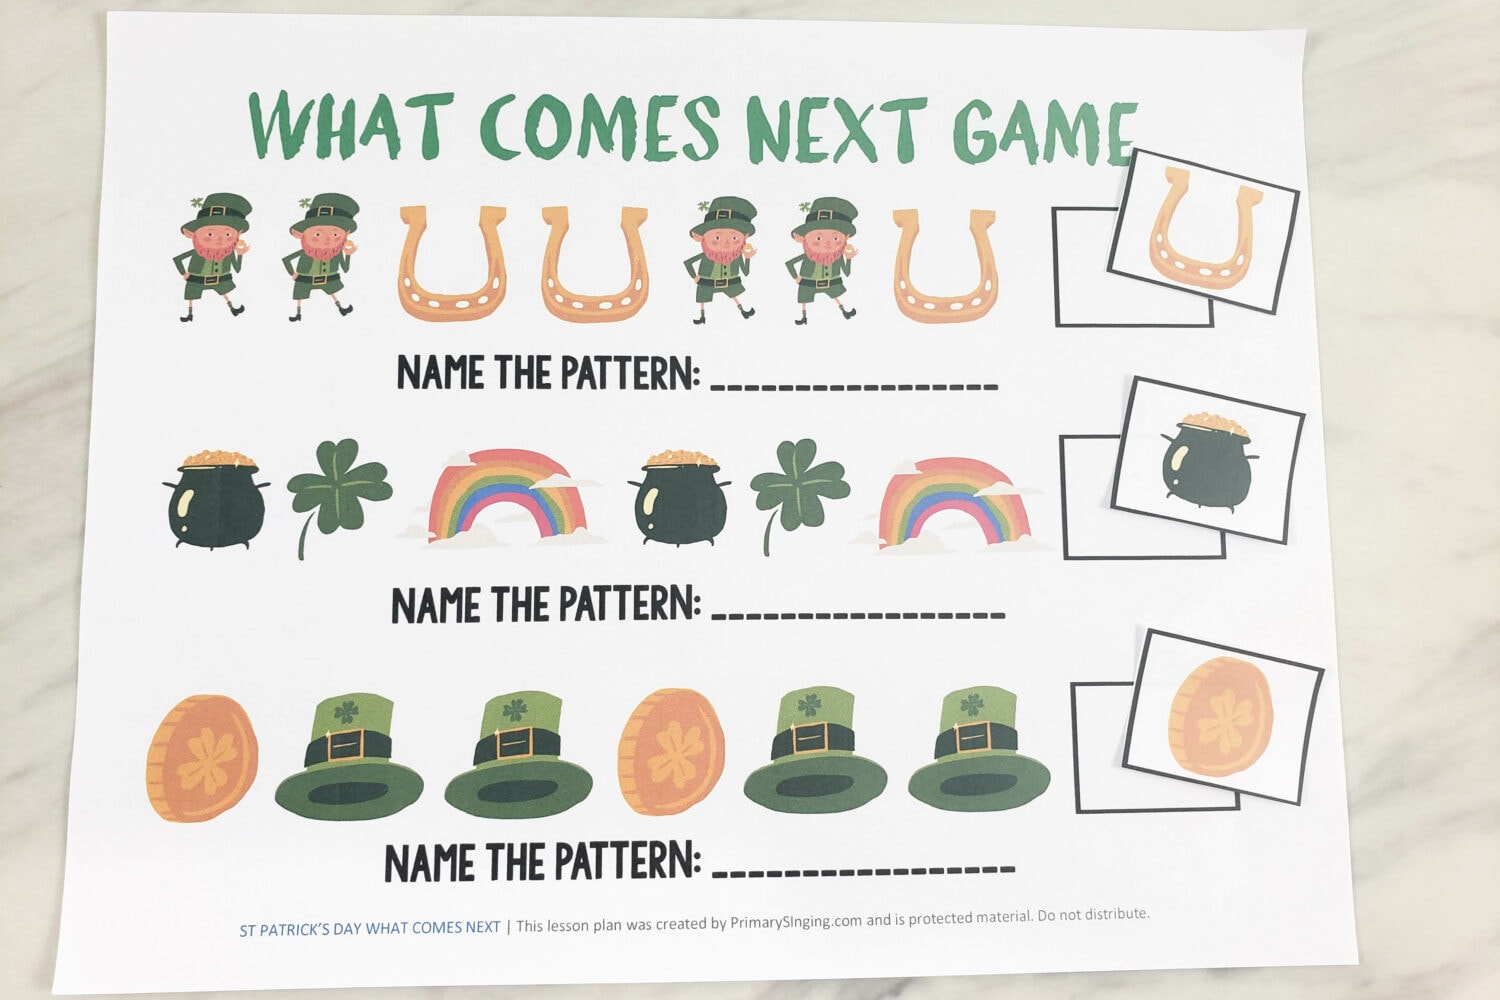 St Patrick's Day Hidden Clovers Game Easy singing time ideas for Primary Music Leaders St Patricks Day What Comes Next 20220225 093501